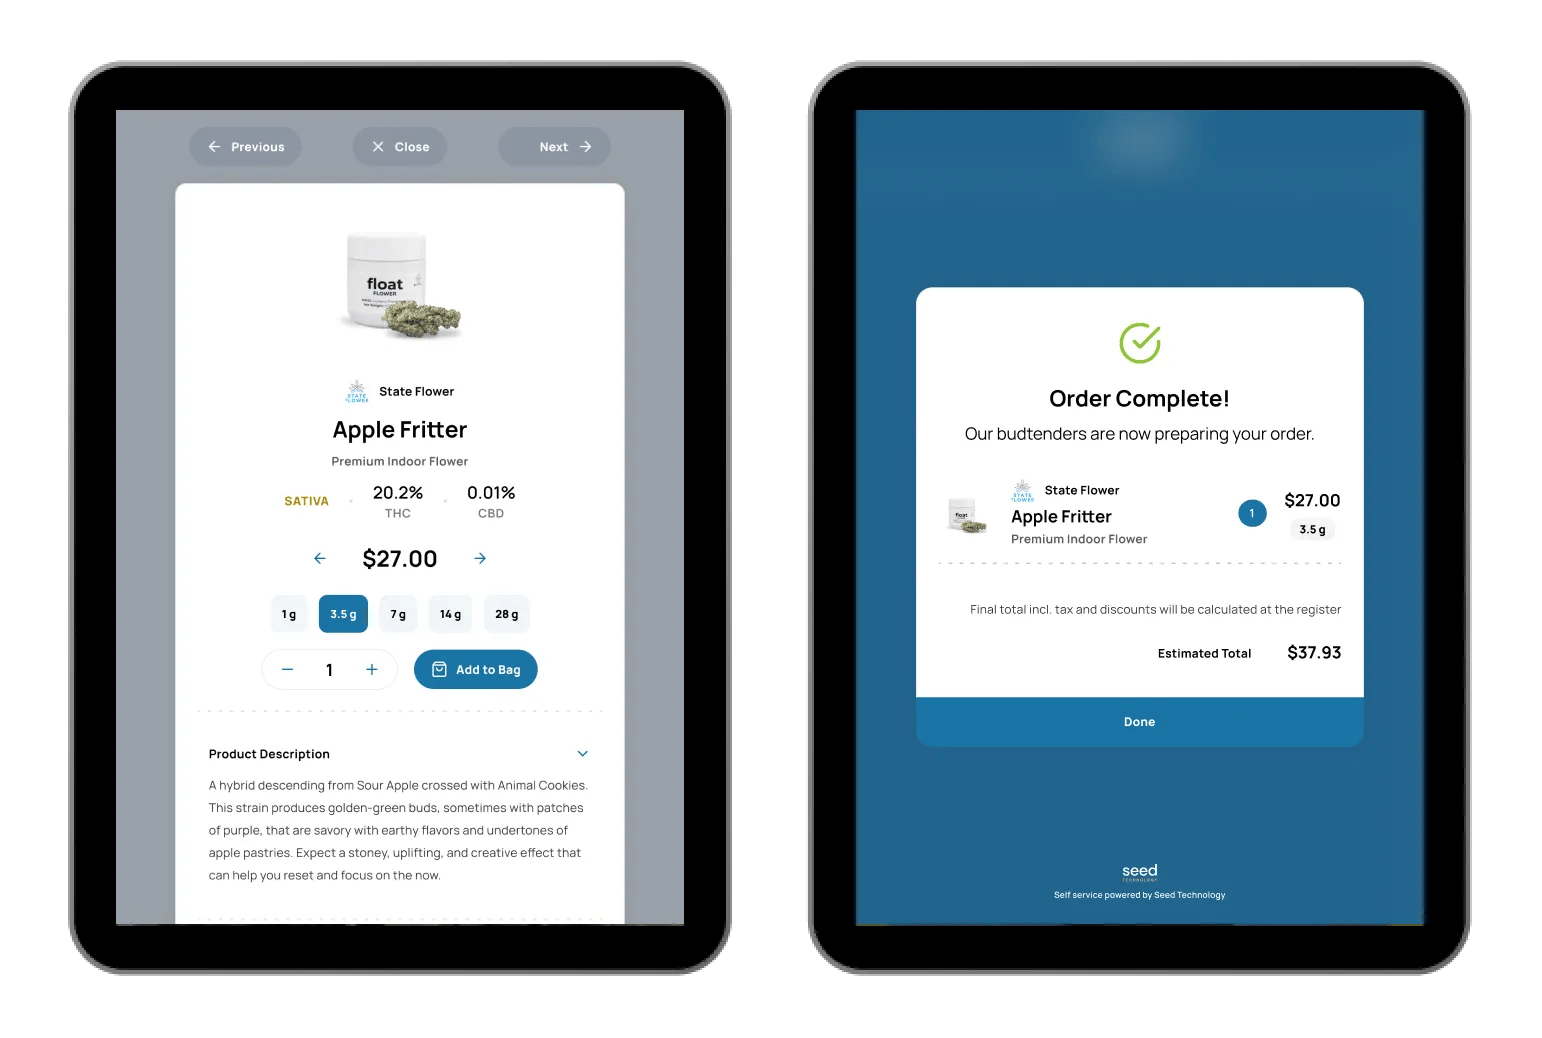 example of self service or self-ordering technology for cannabis dispensaries